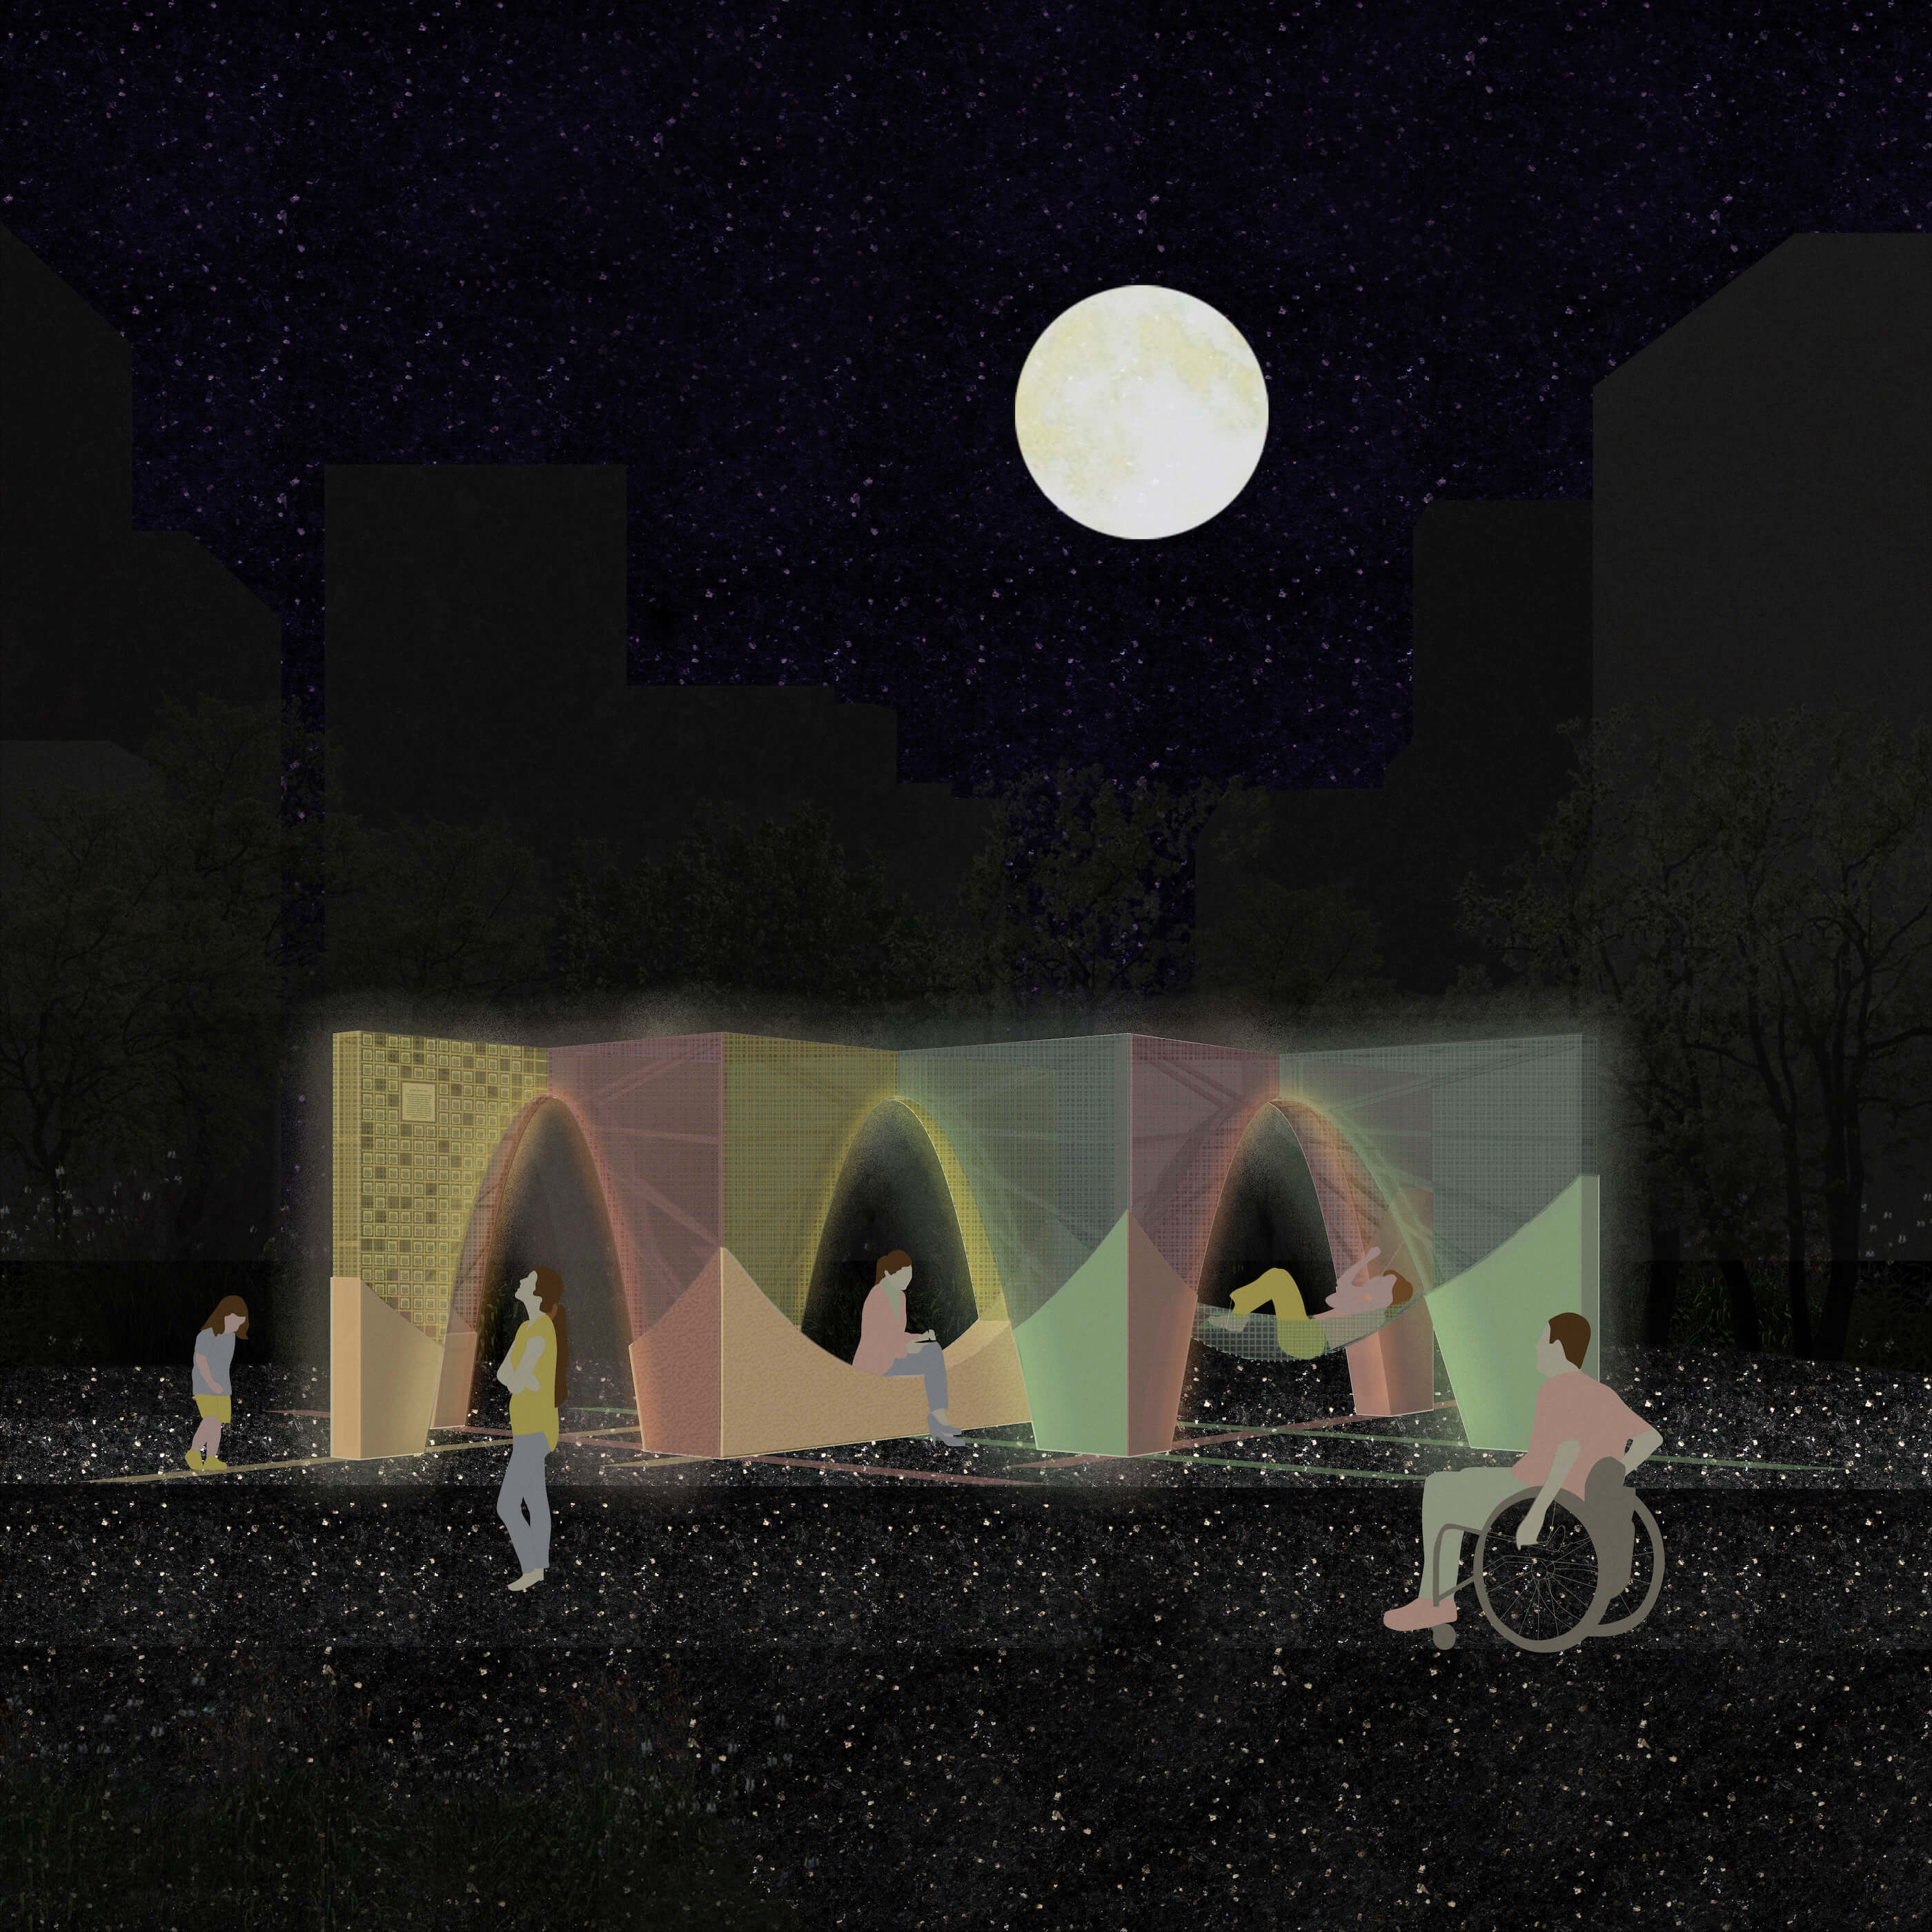 rendering of an interactive public art installation at night